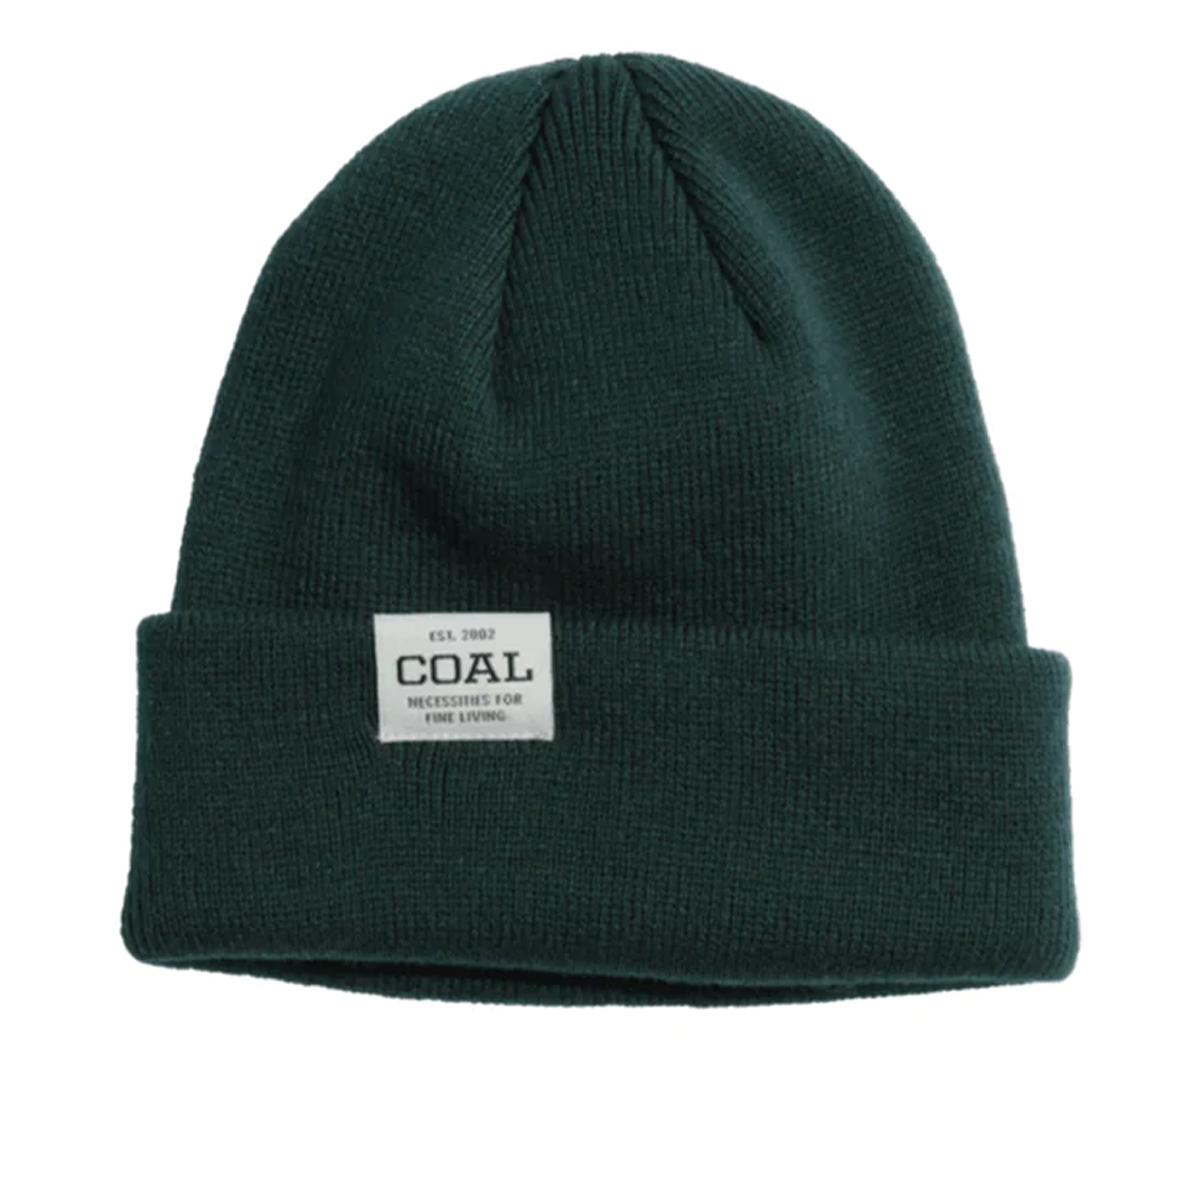 Coal The Uniform Low Knit Cuff Beanie - Assorted Colors